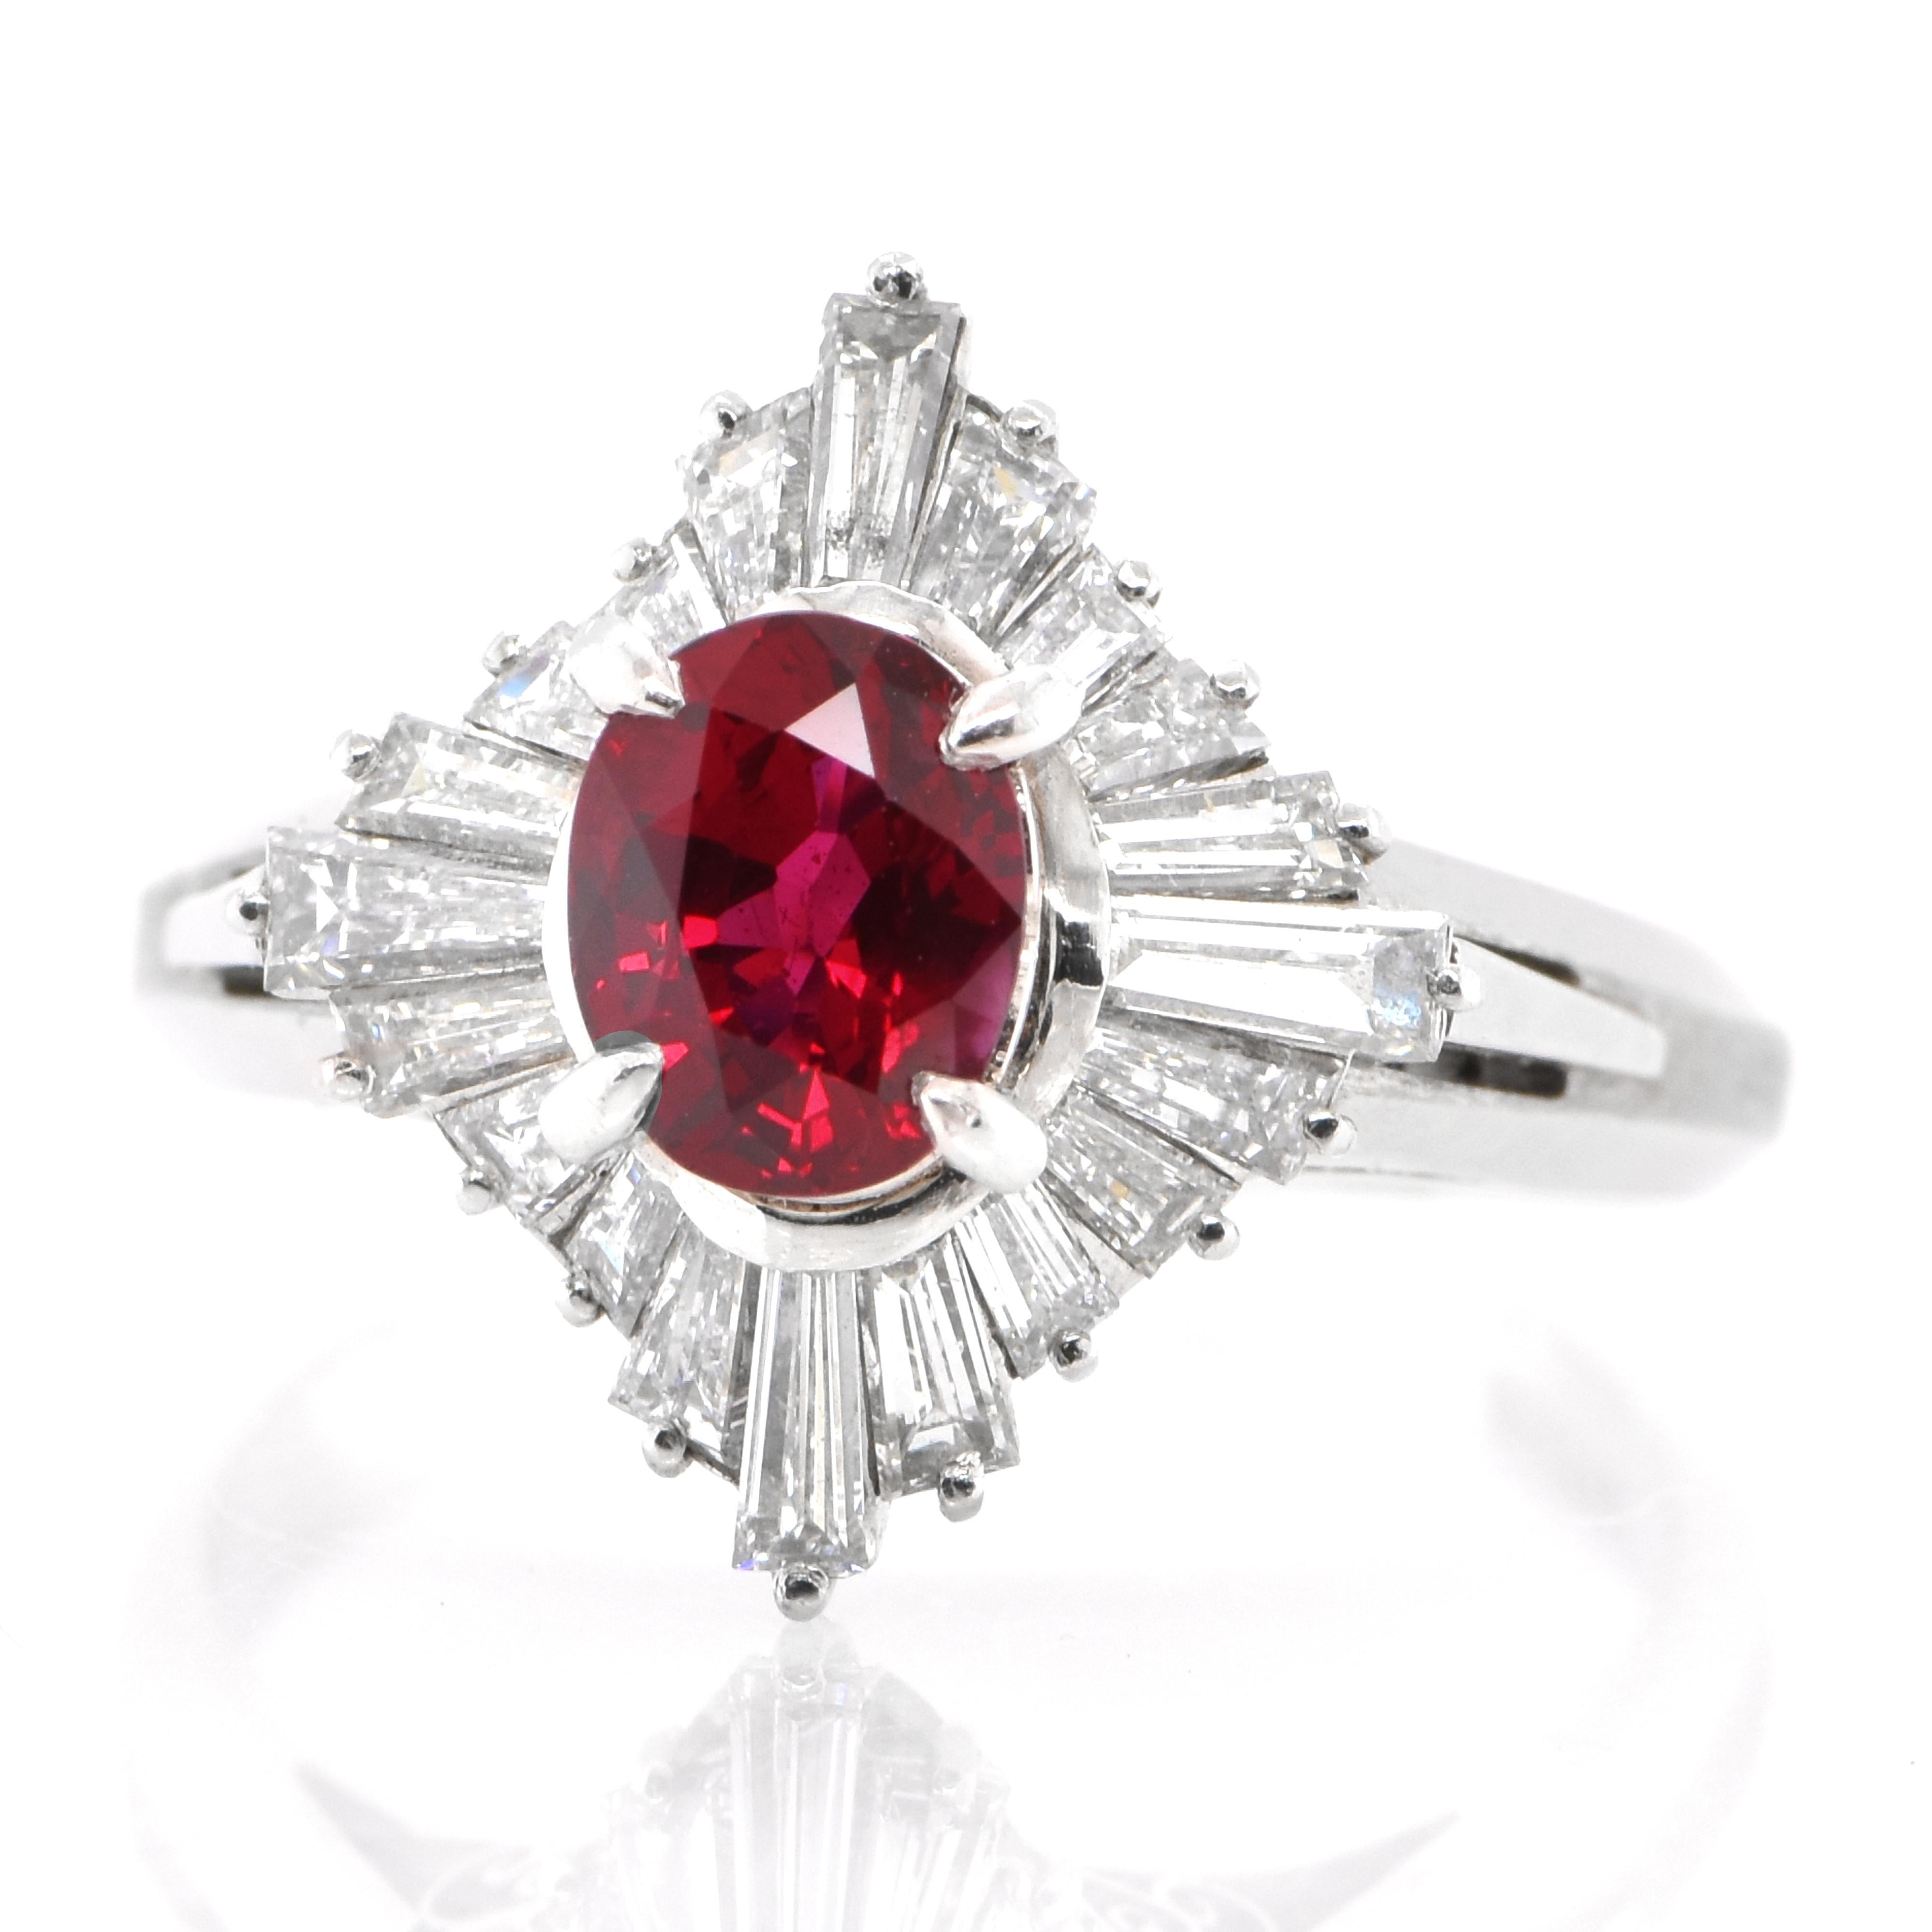 A beautiful ring set in Platinum featuring a 1.15 Carat Natural Ruby and 1.05 Carat Diamonds. Rubies are referred to as 